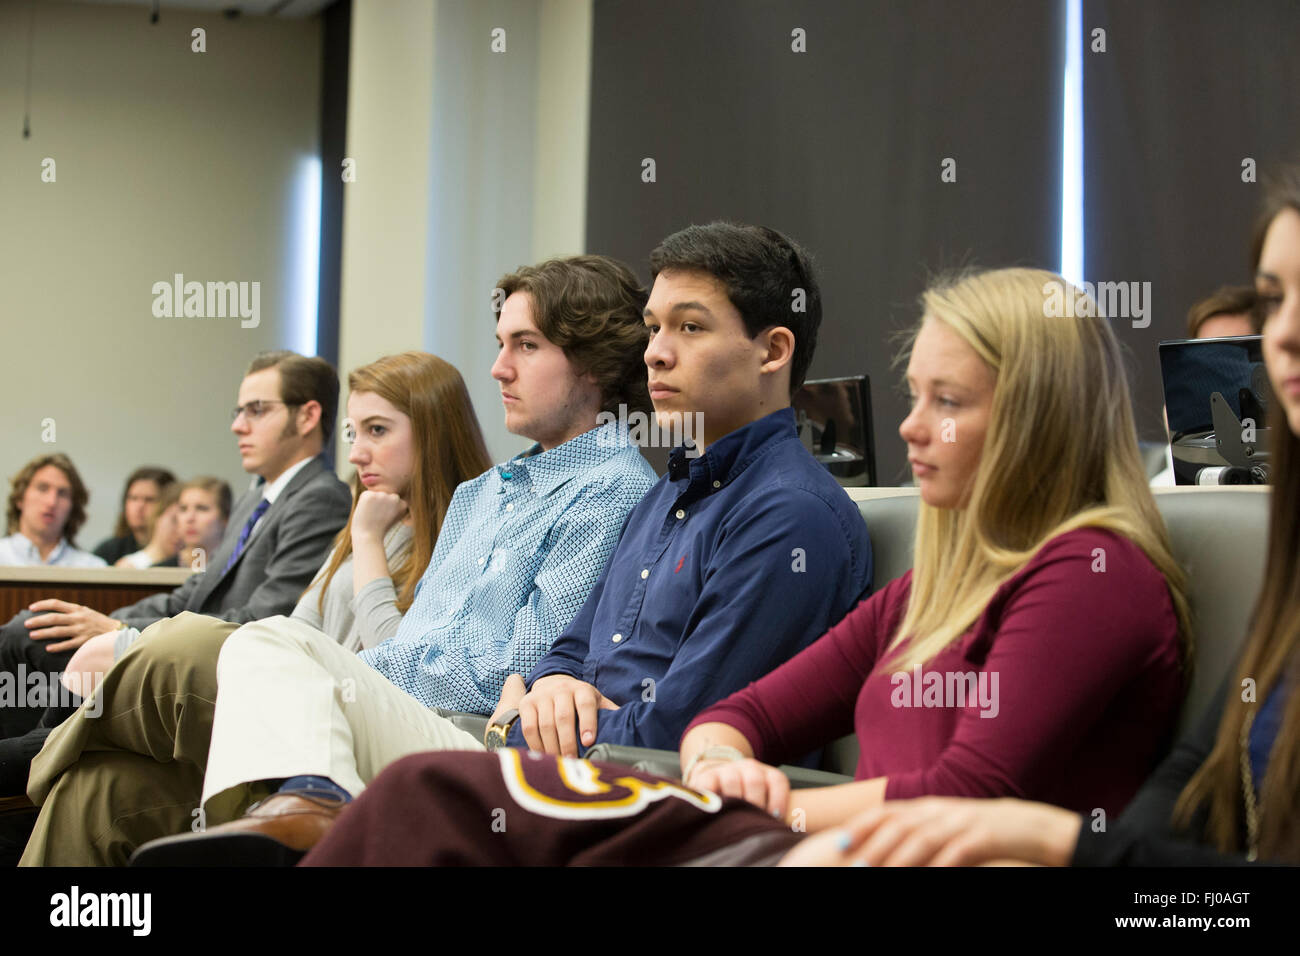 Teens posing as jurors listen to proceedings in county courtroom during mock trial for high school students in Texas Stock Photo